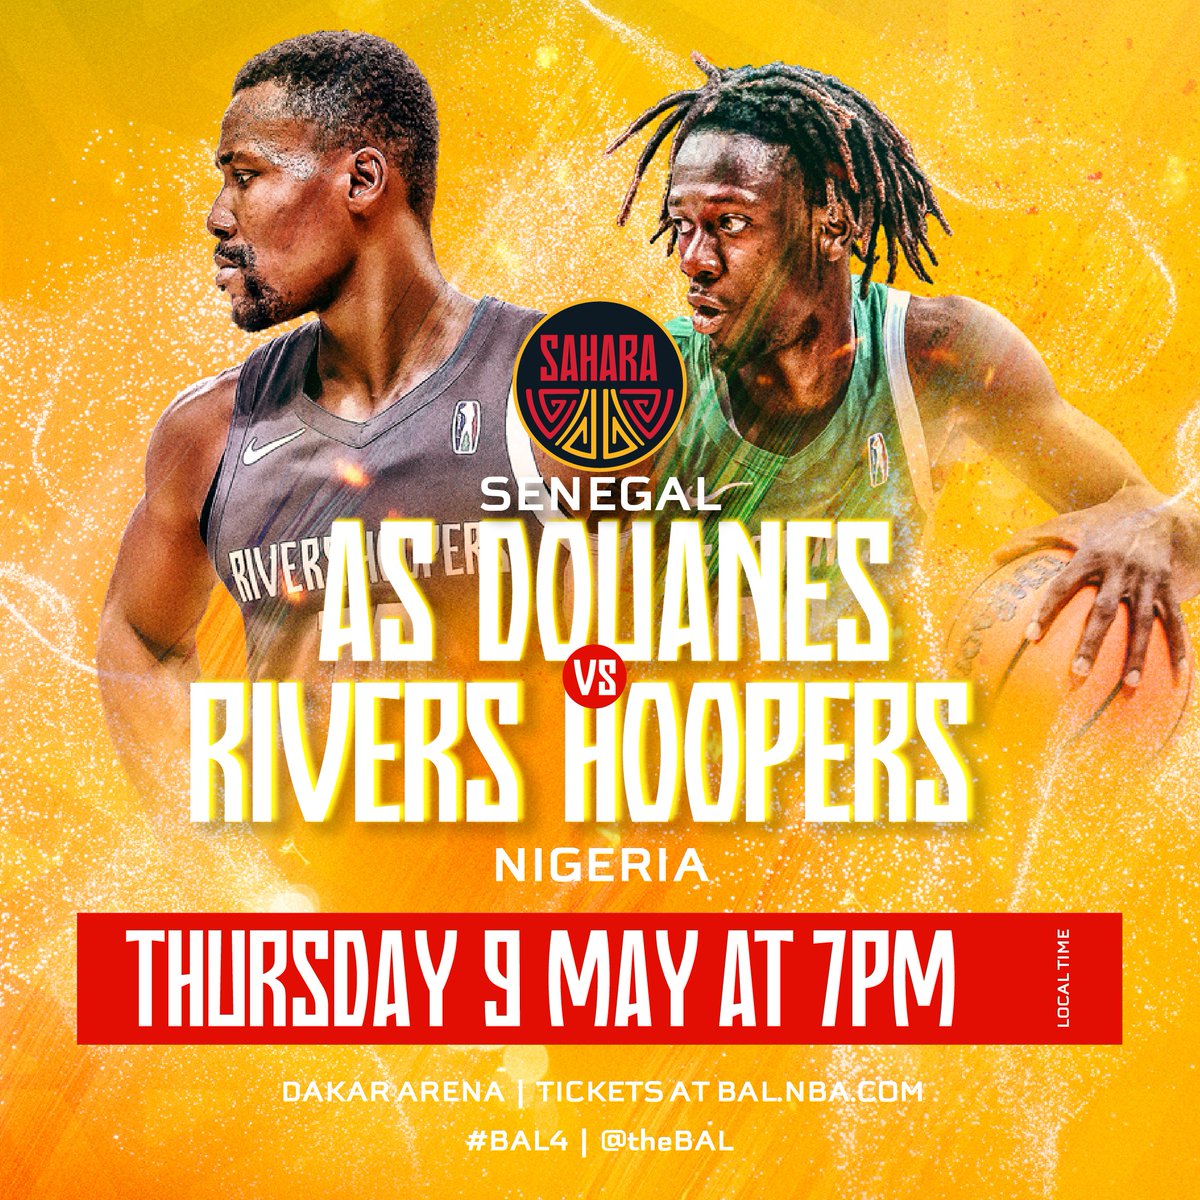 Thursday BAL Games in Dakar! #BAL4 ⏰16:0: US Monastir 🇹🇳 v APR 🇷🇼 ⏰17:30: AS Douanes 🇸🇳 vs Rivers Hoopers 🇳🇬 🎟️Get your tickets now on: BAL.NBA.com 👀Watch the games live on: 📺youtube.com/@thebal 📲BAL.NBA.com / NBA App 💻bal.nba.com…